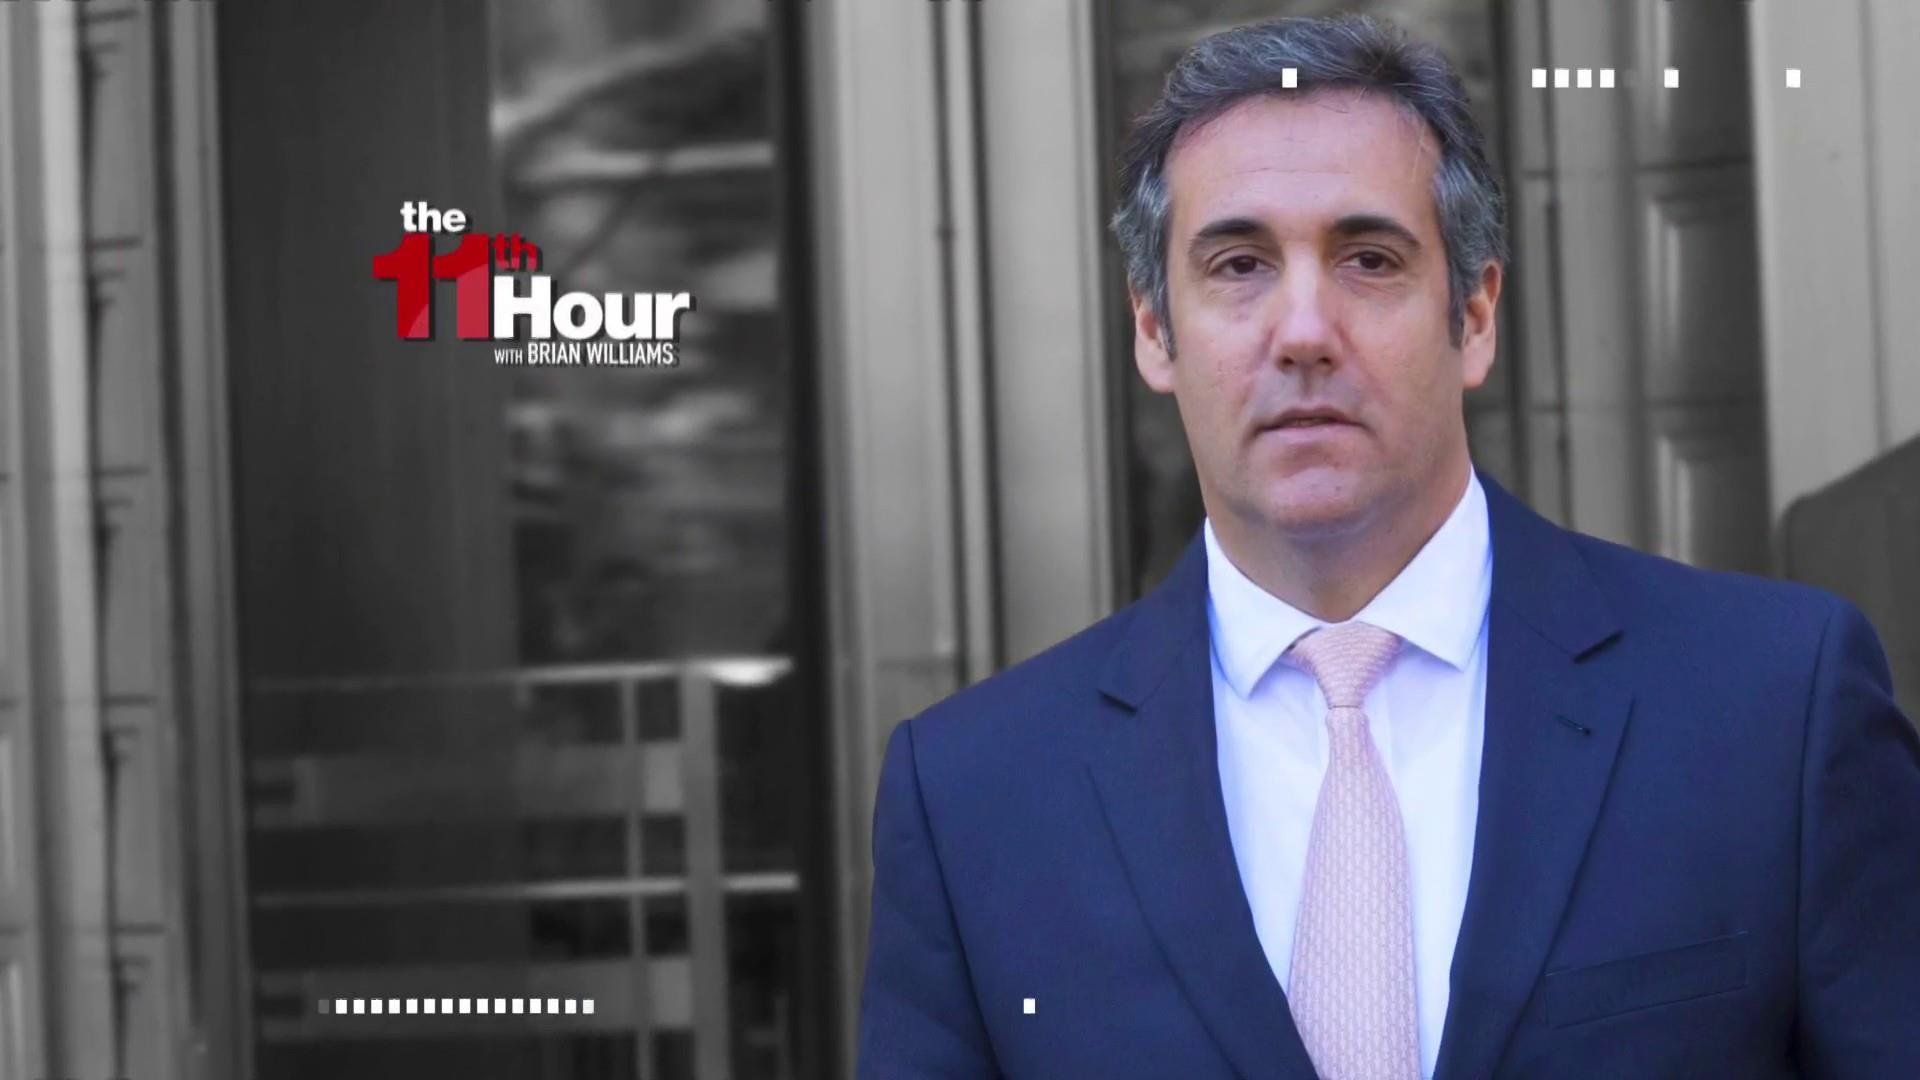 Trump Lawyer in Hot Water after Fmr. Partner Takes Plea Deal